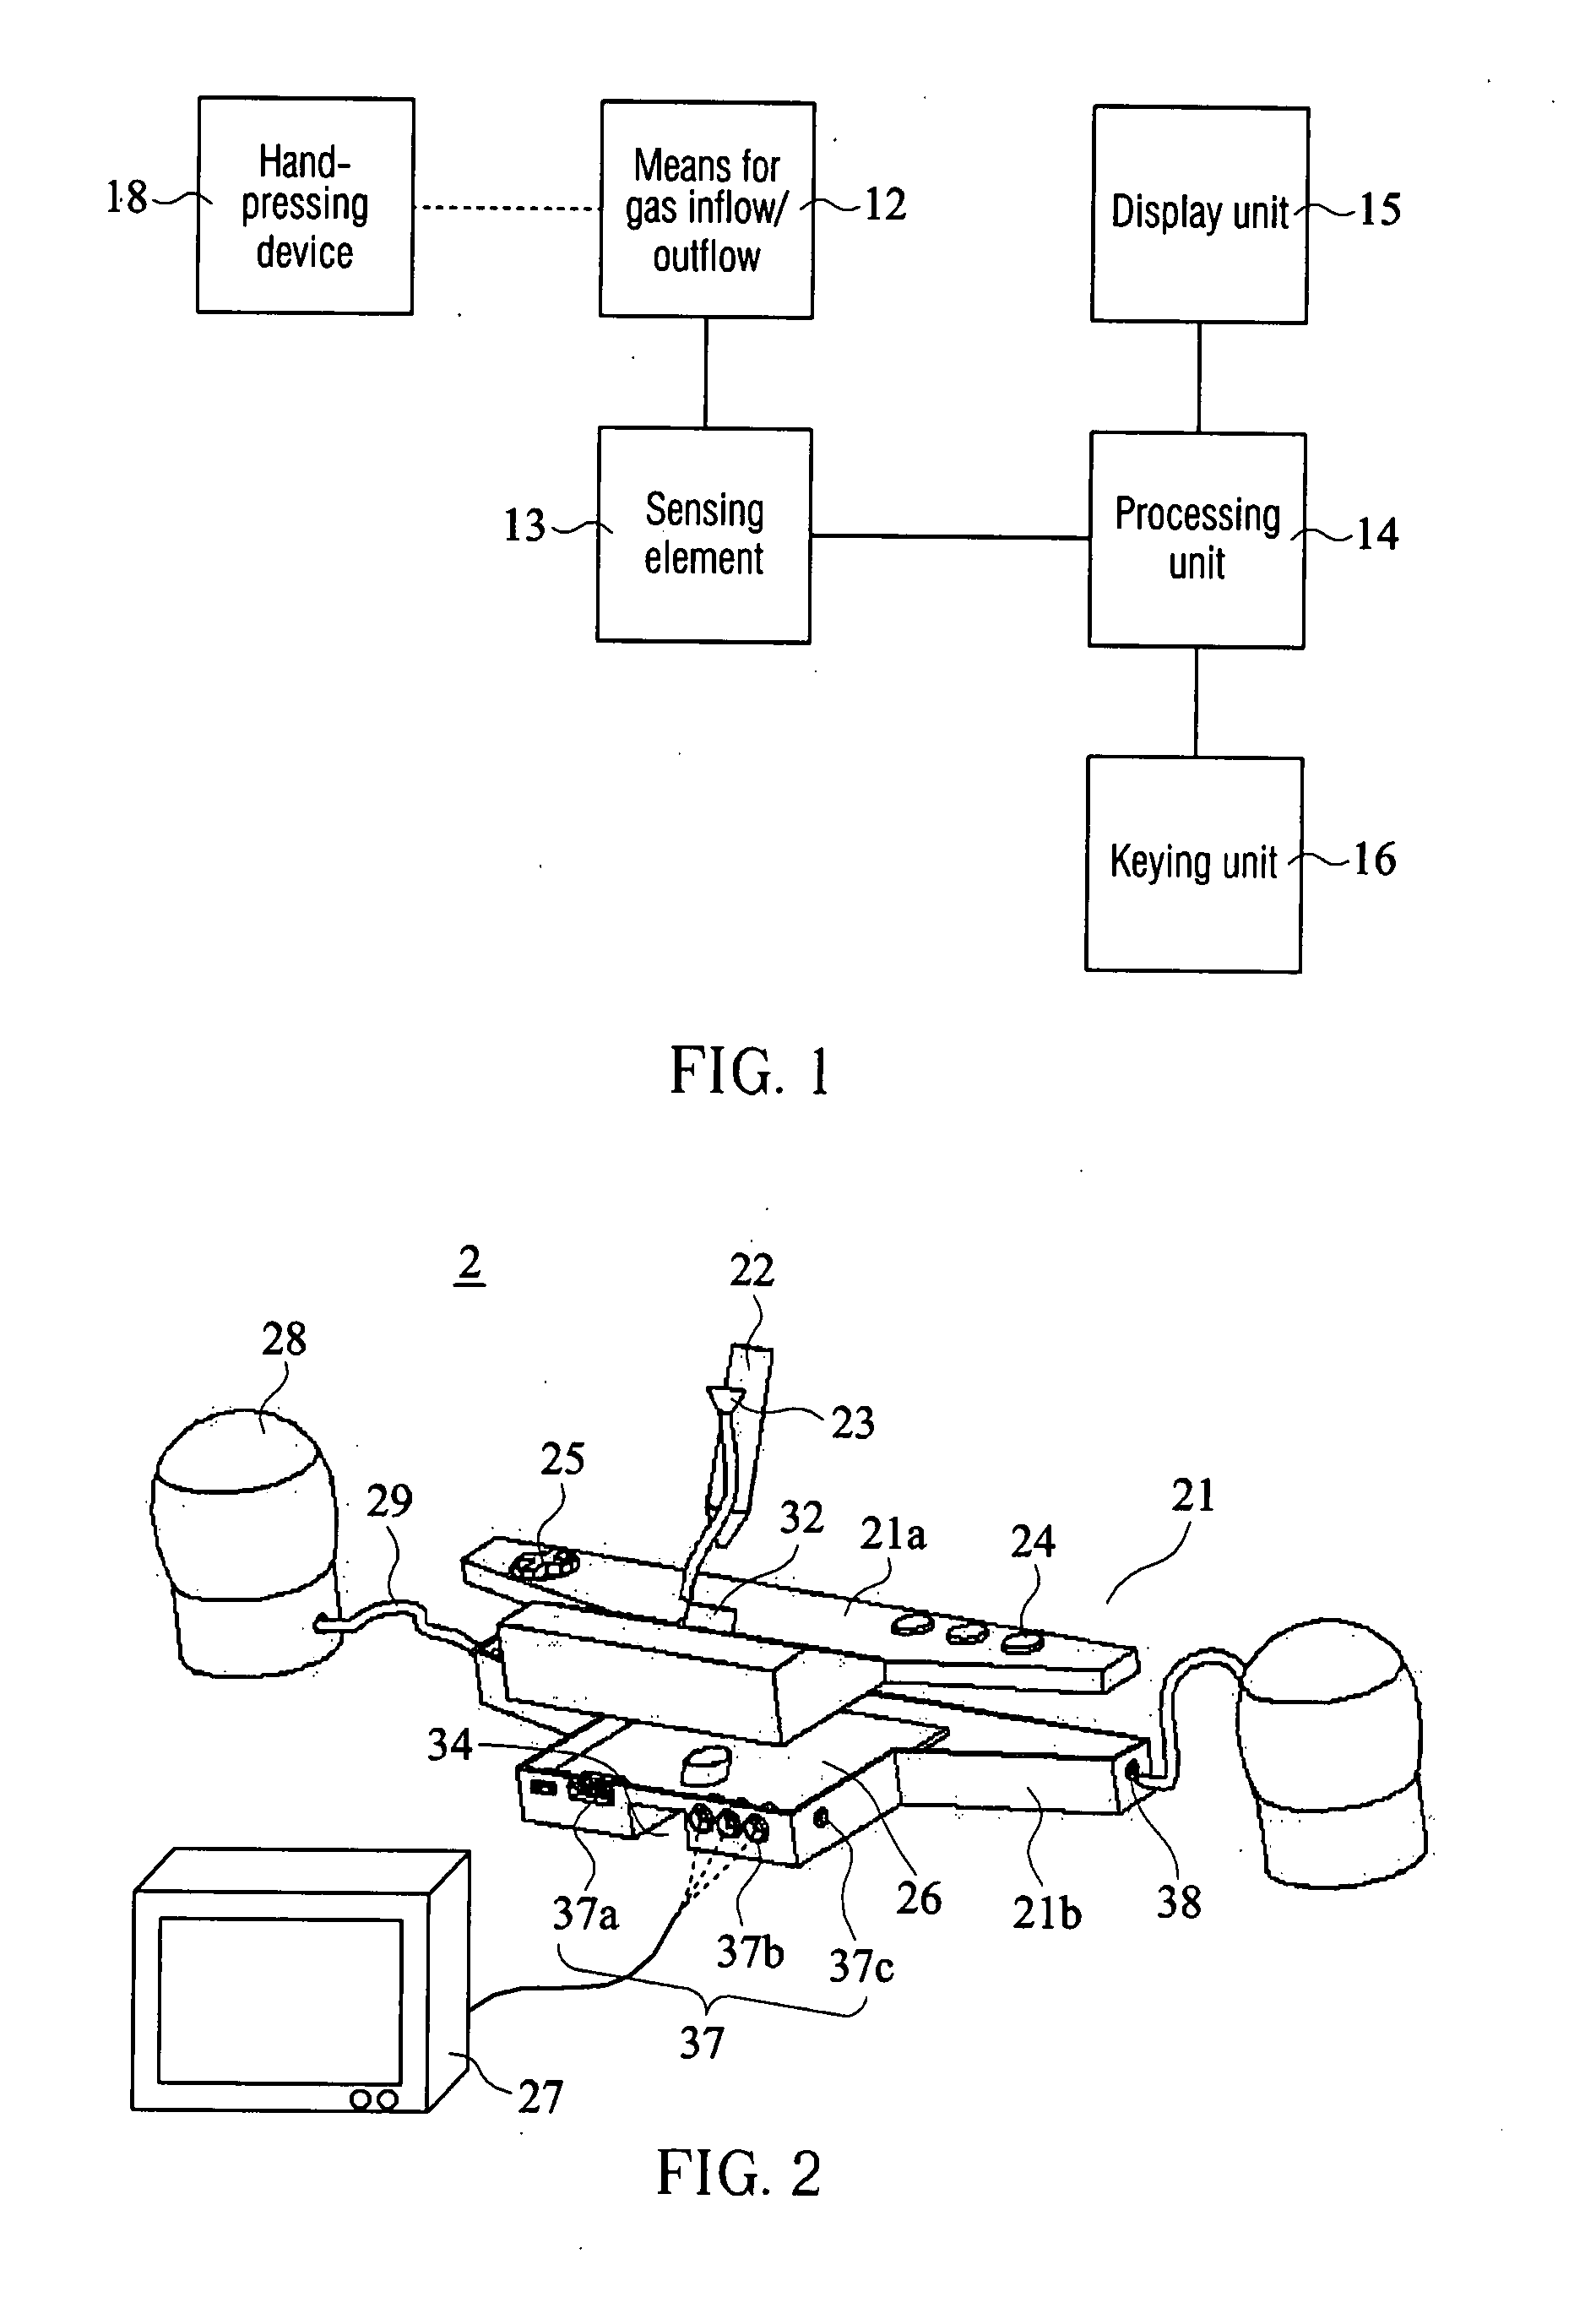 Health care gaming device and method using the same